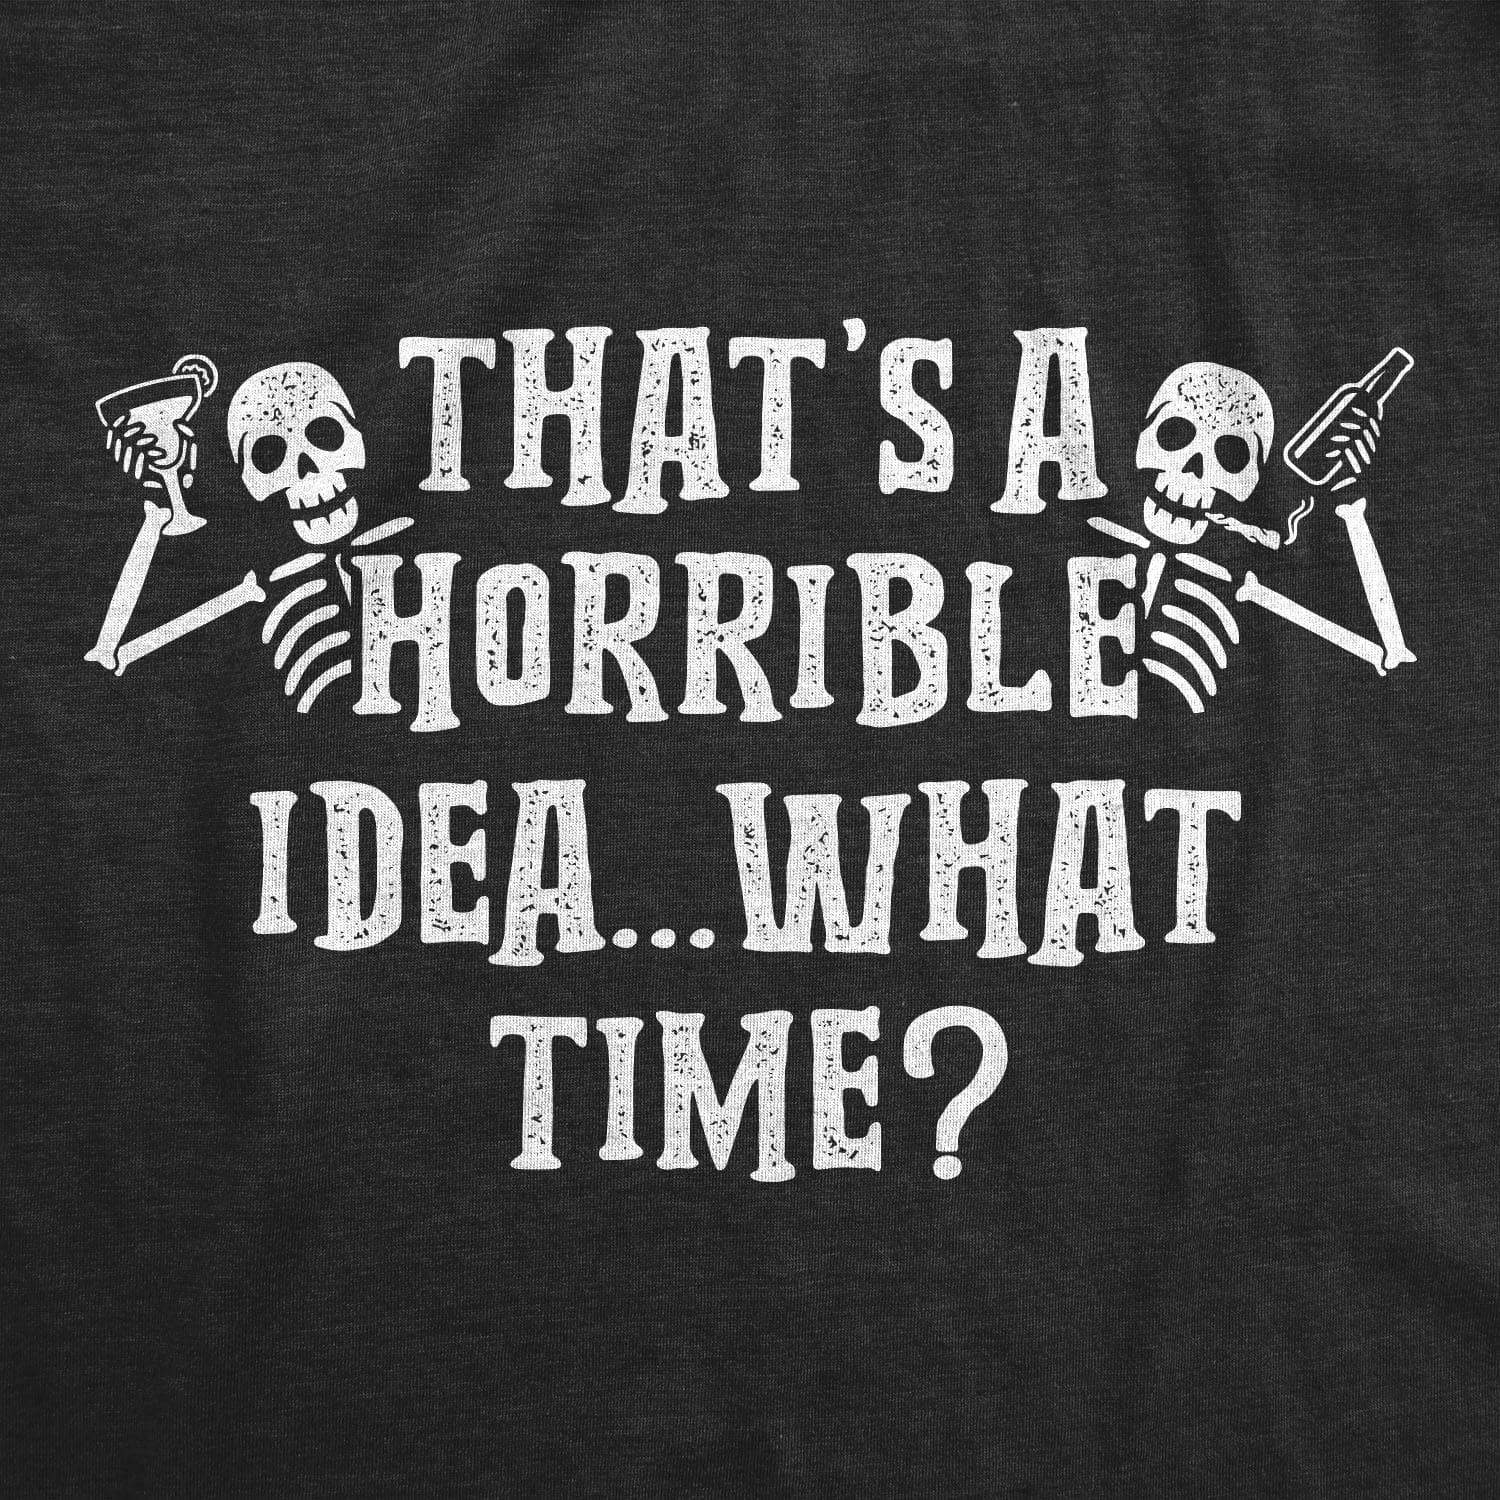 That's A Horrible Idea What Time Skeletons Women's Tshirt - Crazy Dog T-Shirts